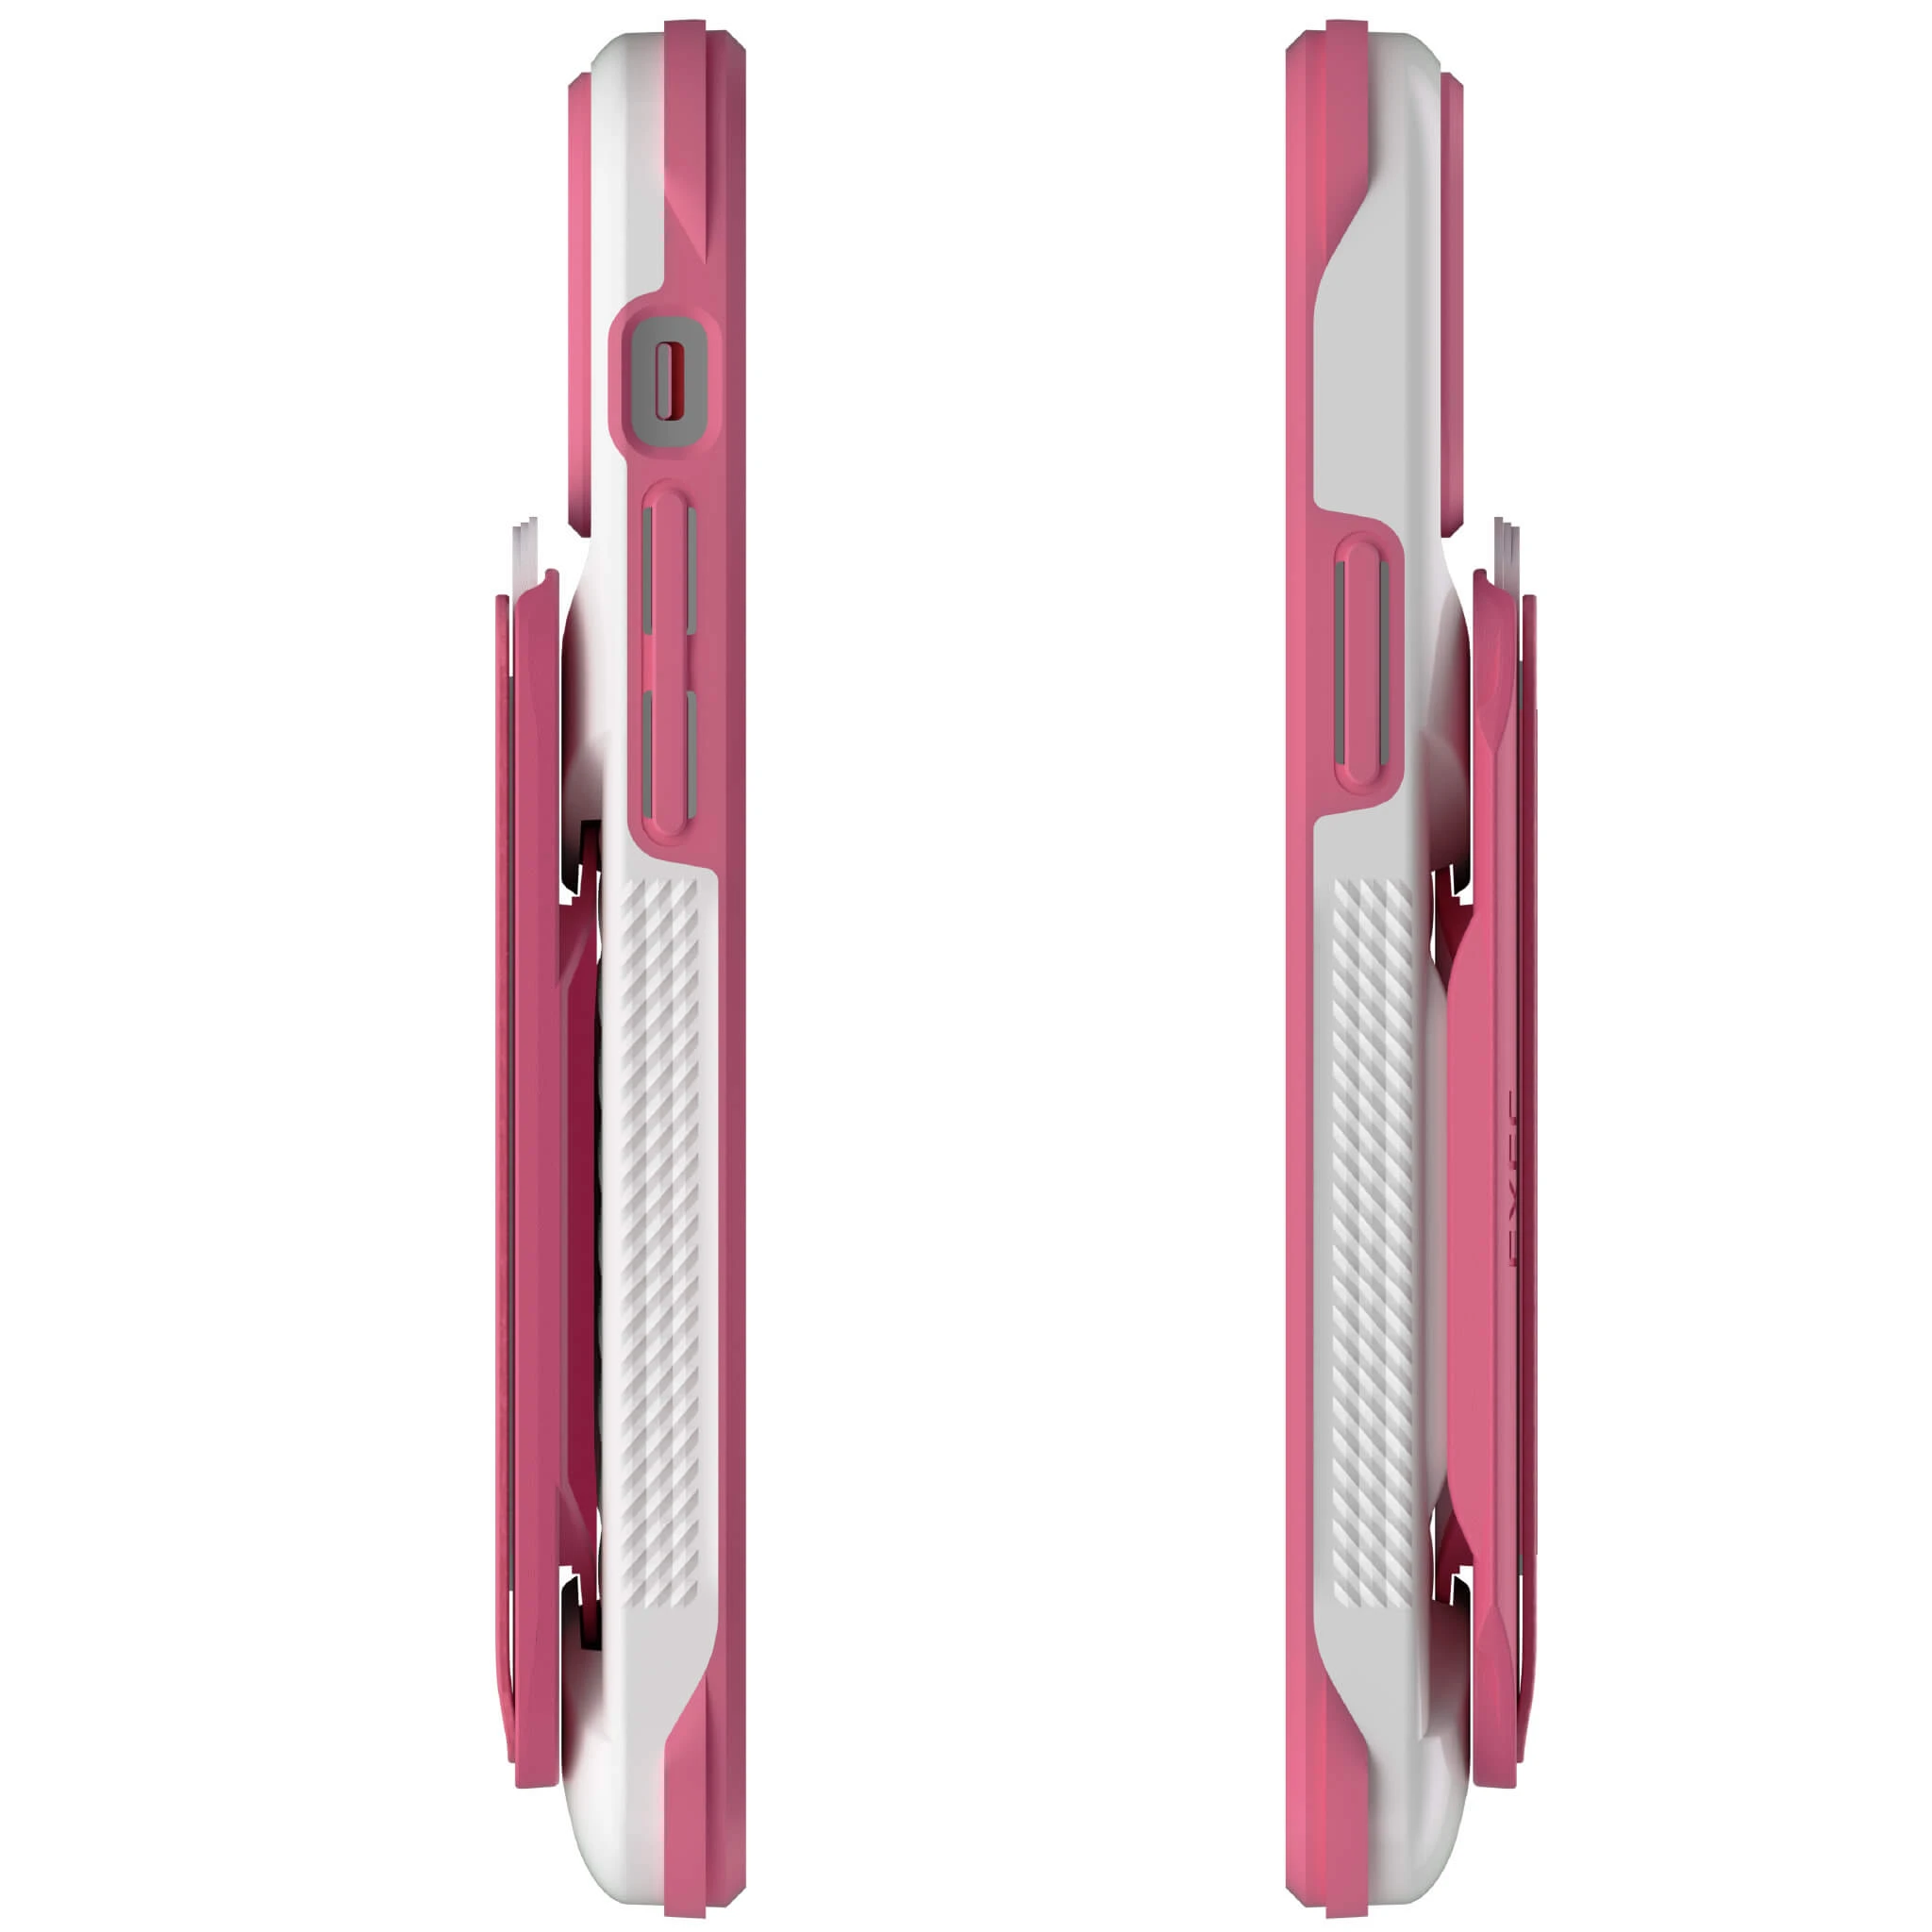 iPhone 12 - Magnetic Wallet Case with Card Holder [Pink] – punkcase